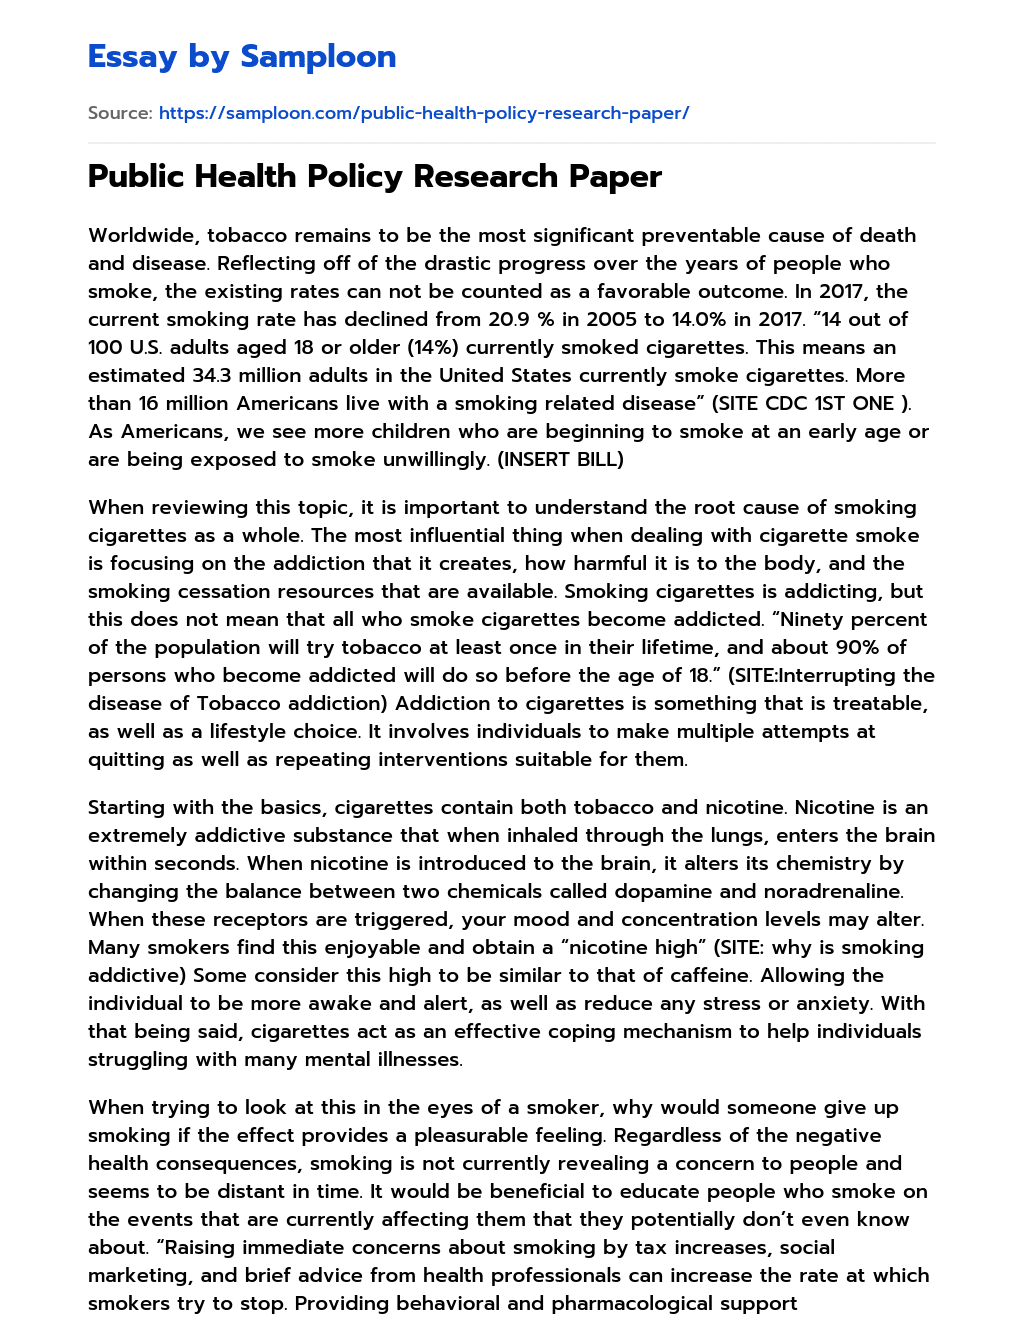 Public Health Policy Research Paper essay